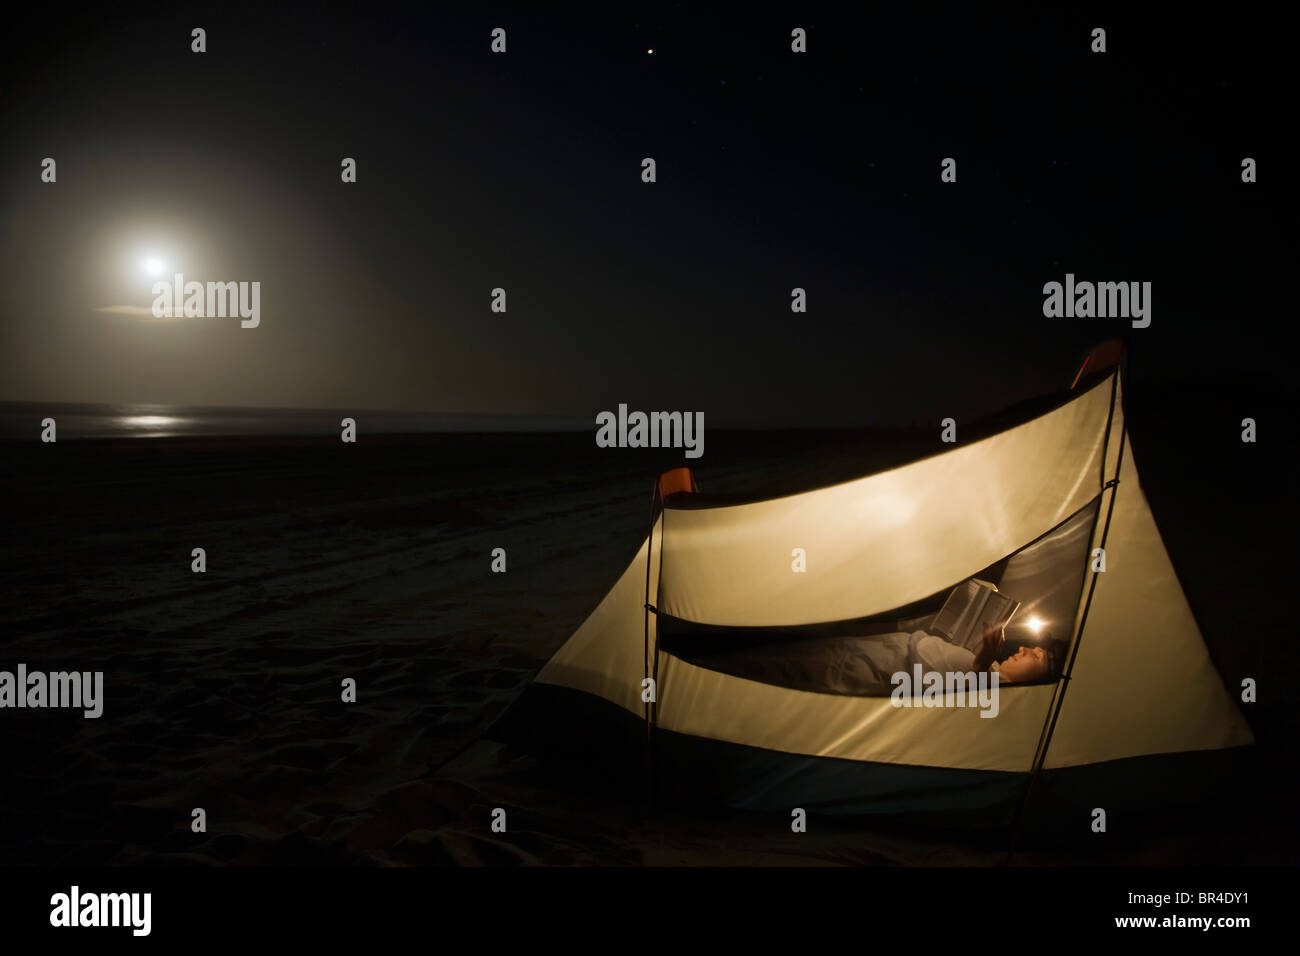 Man on beach camping Banque D'Images